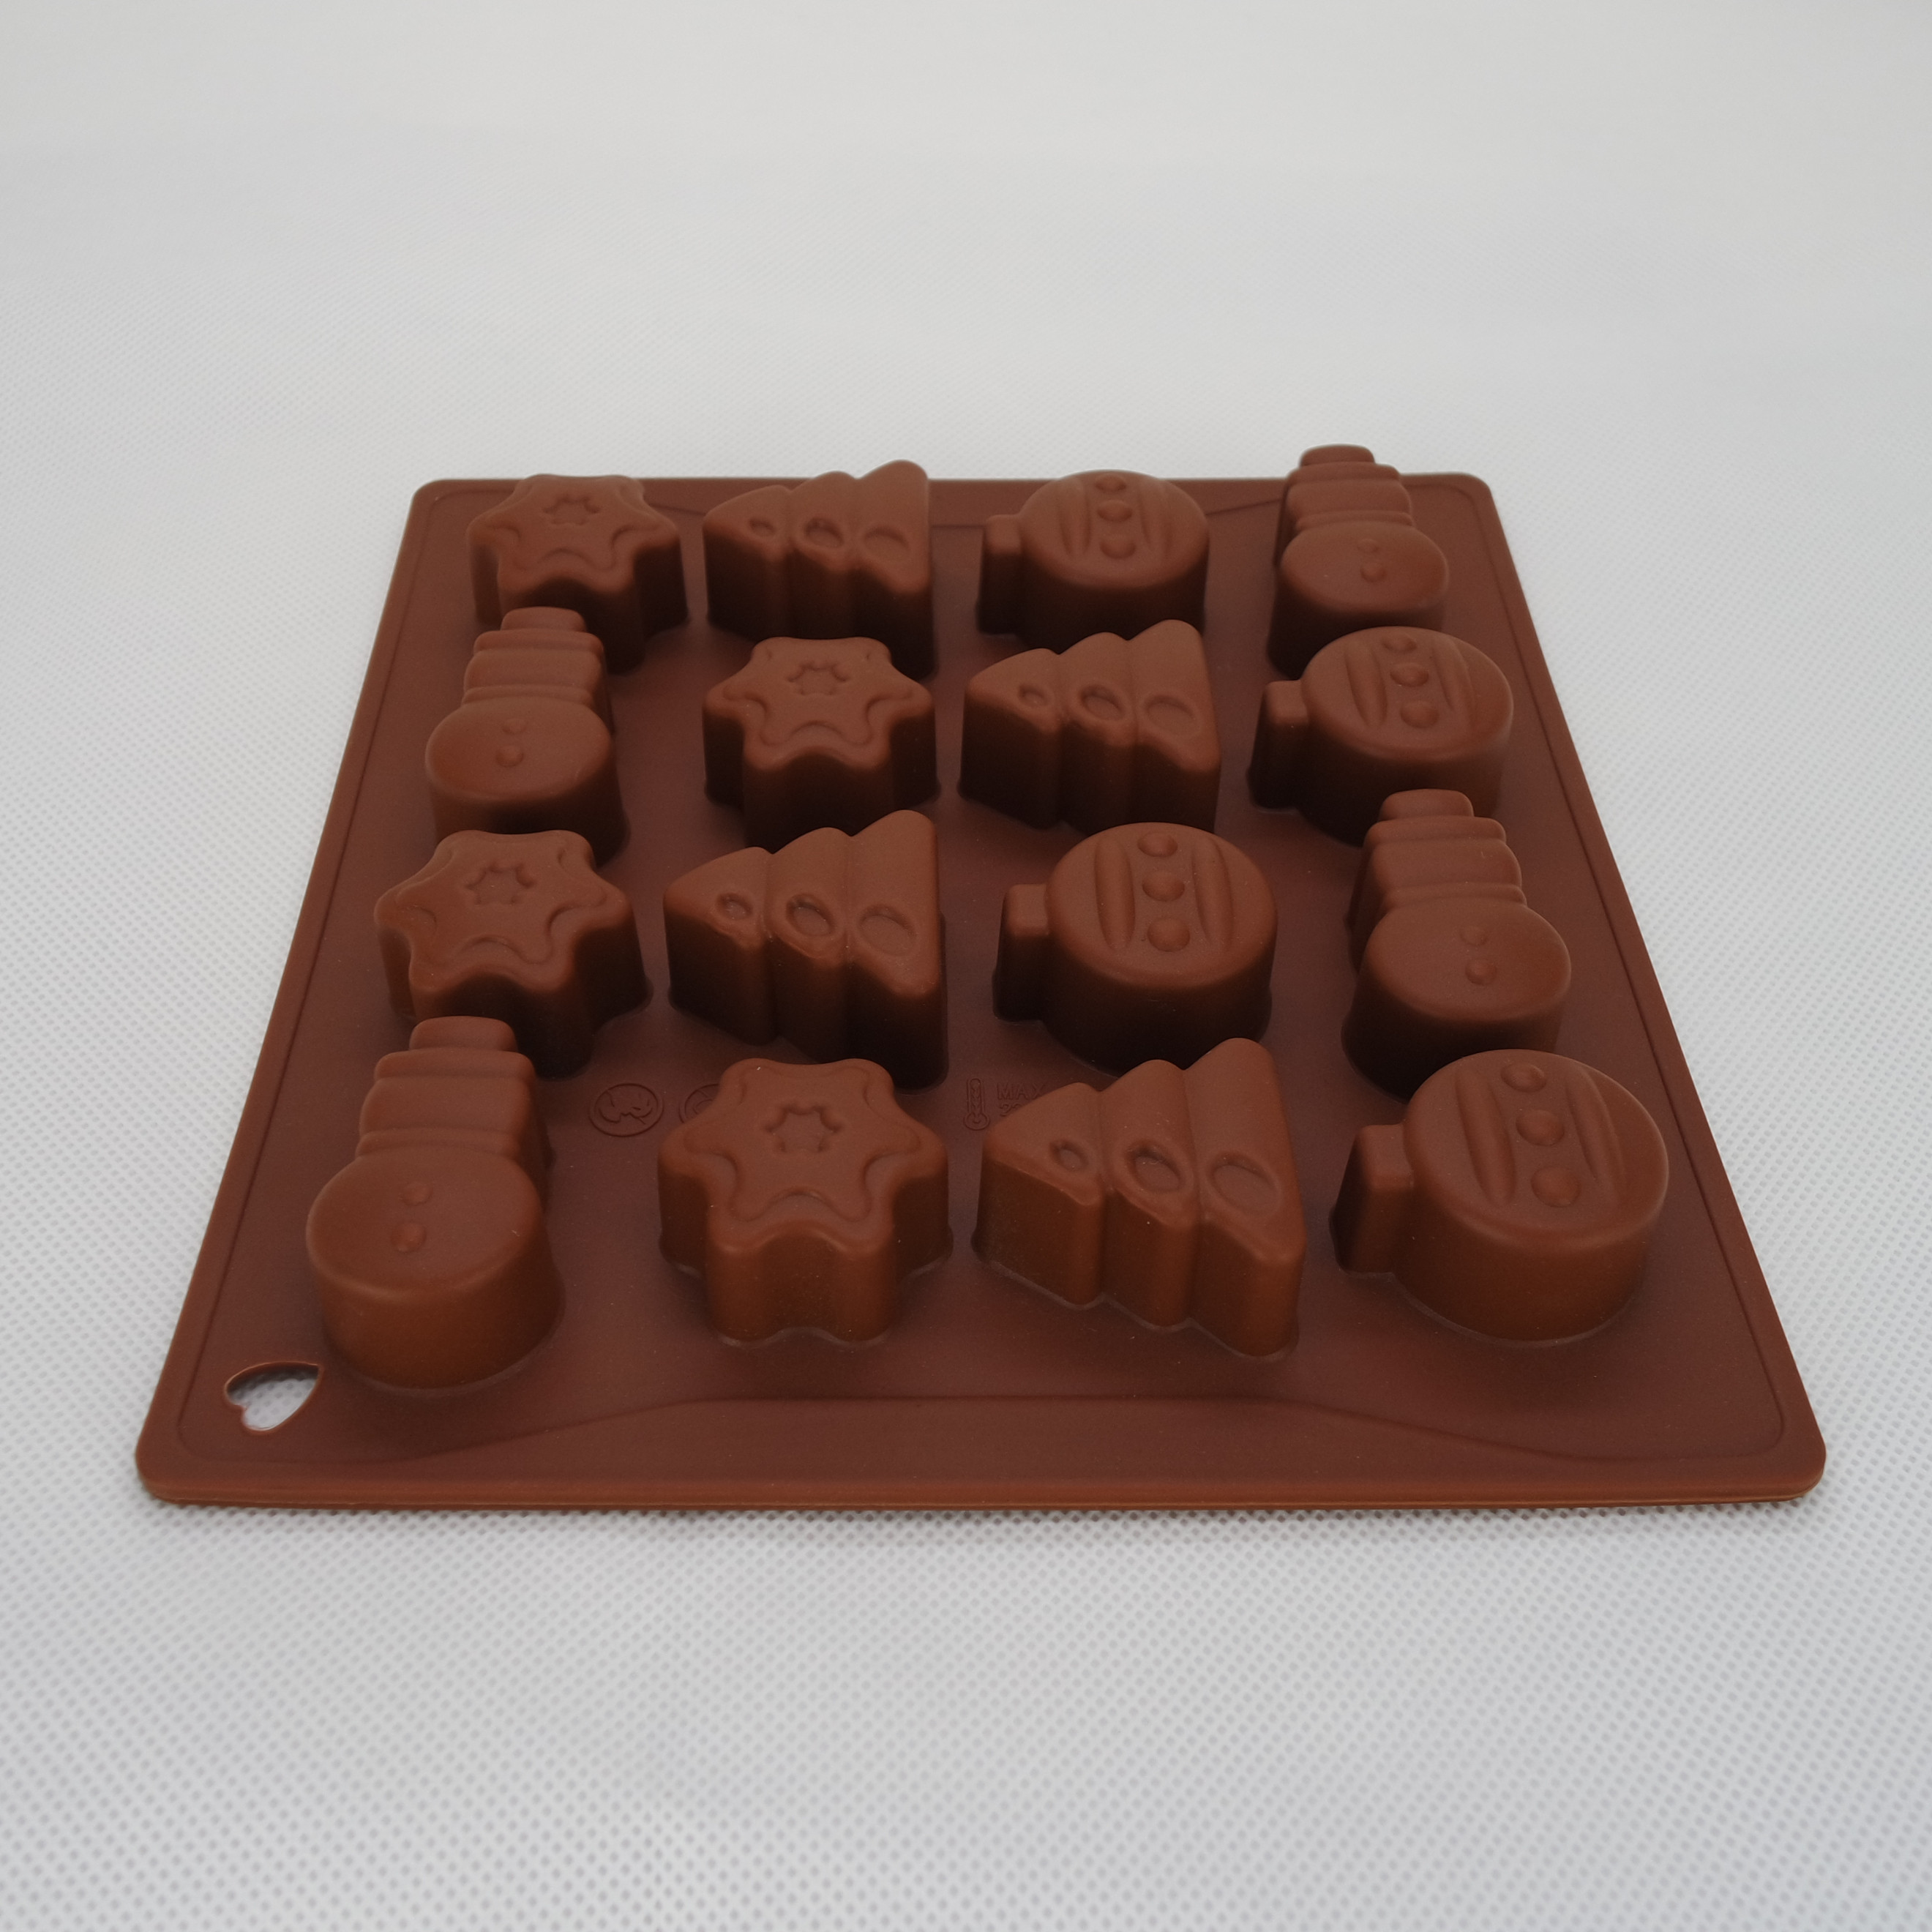 CXCH-016	Silicone Bakeware Chocolate Mould 16-Cup